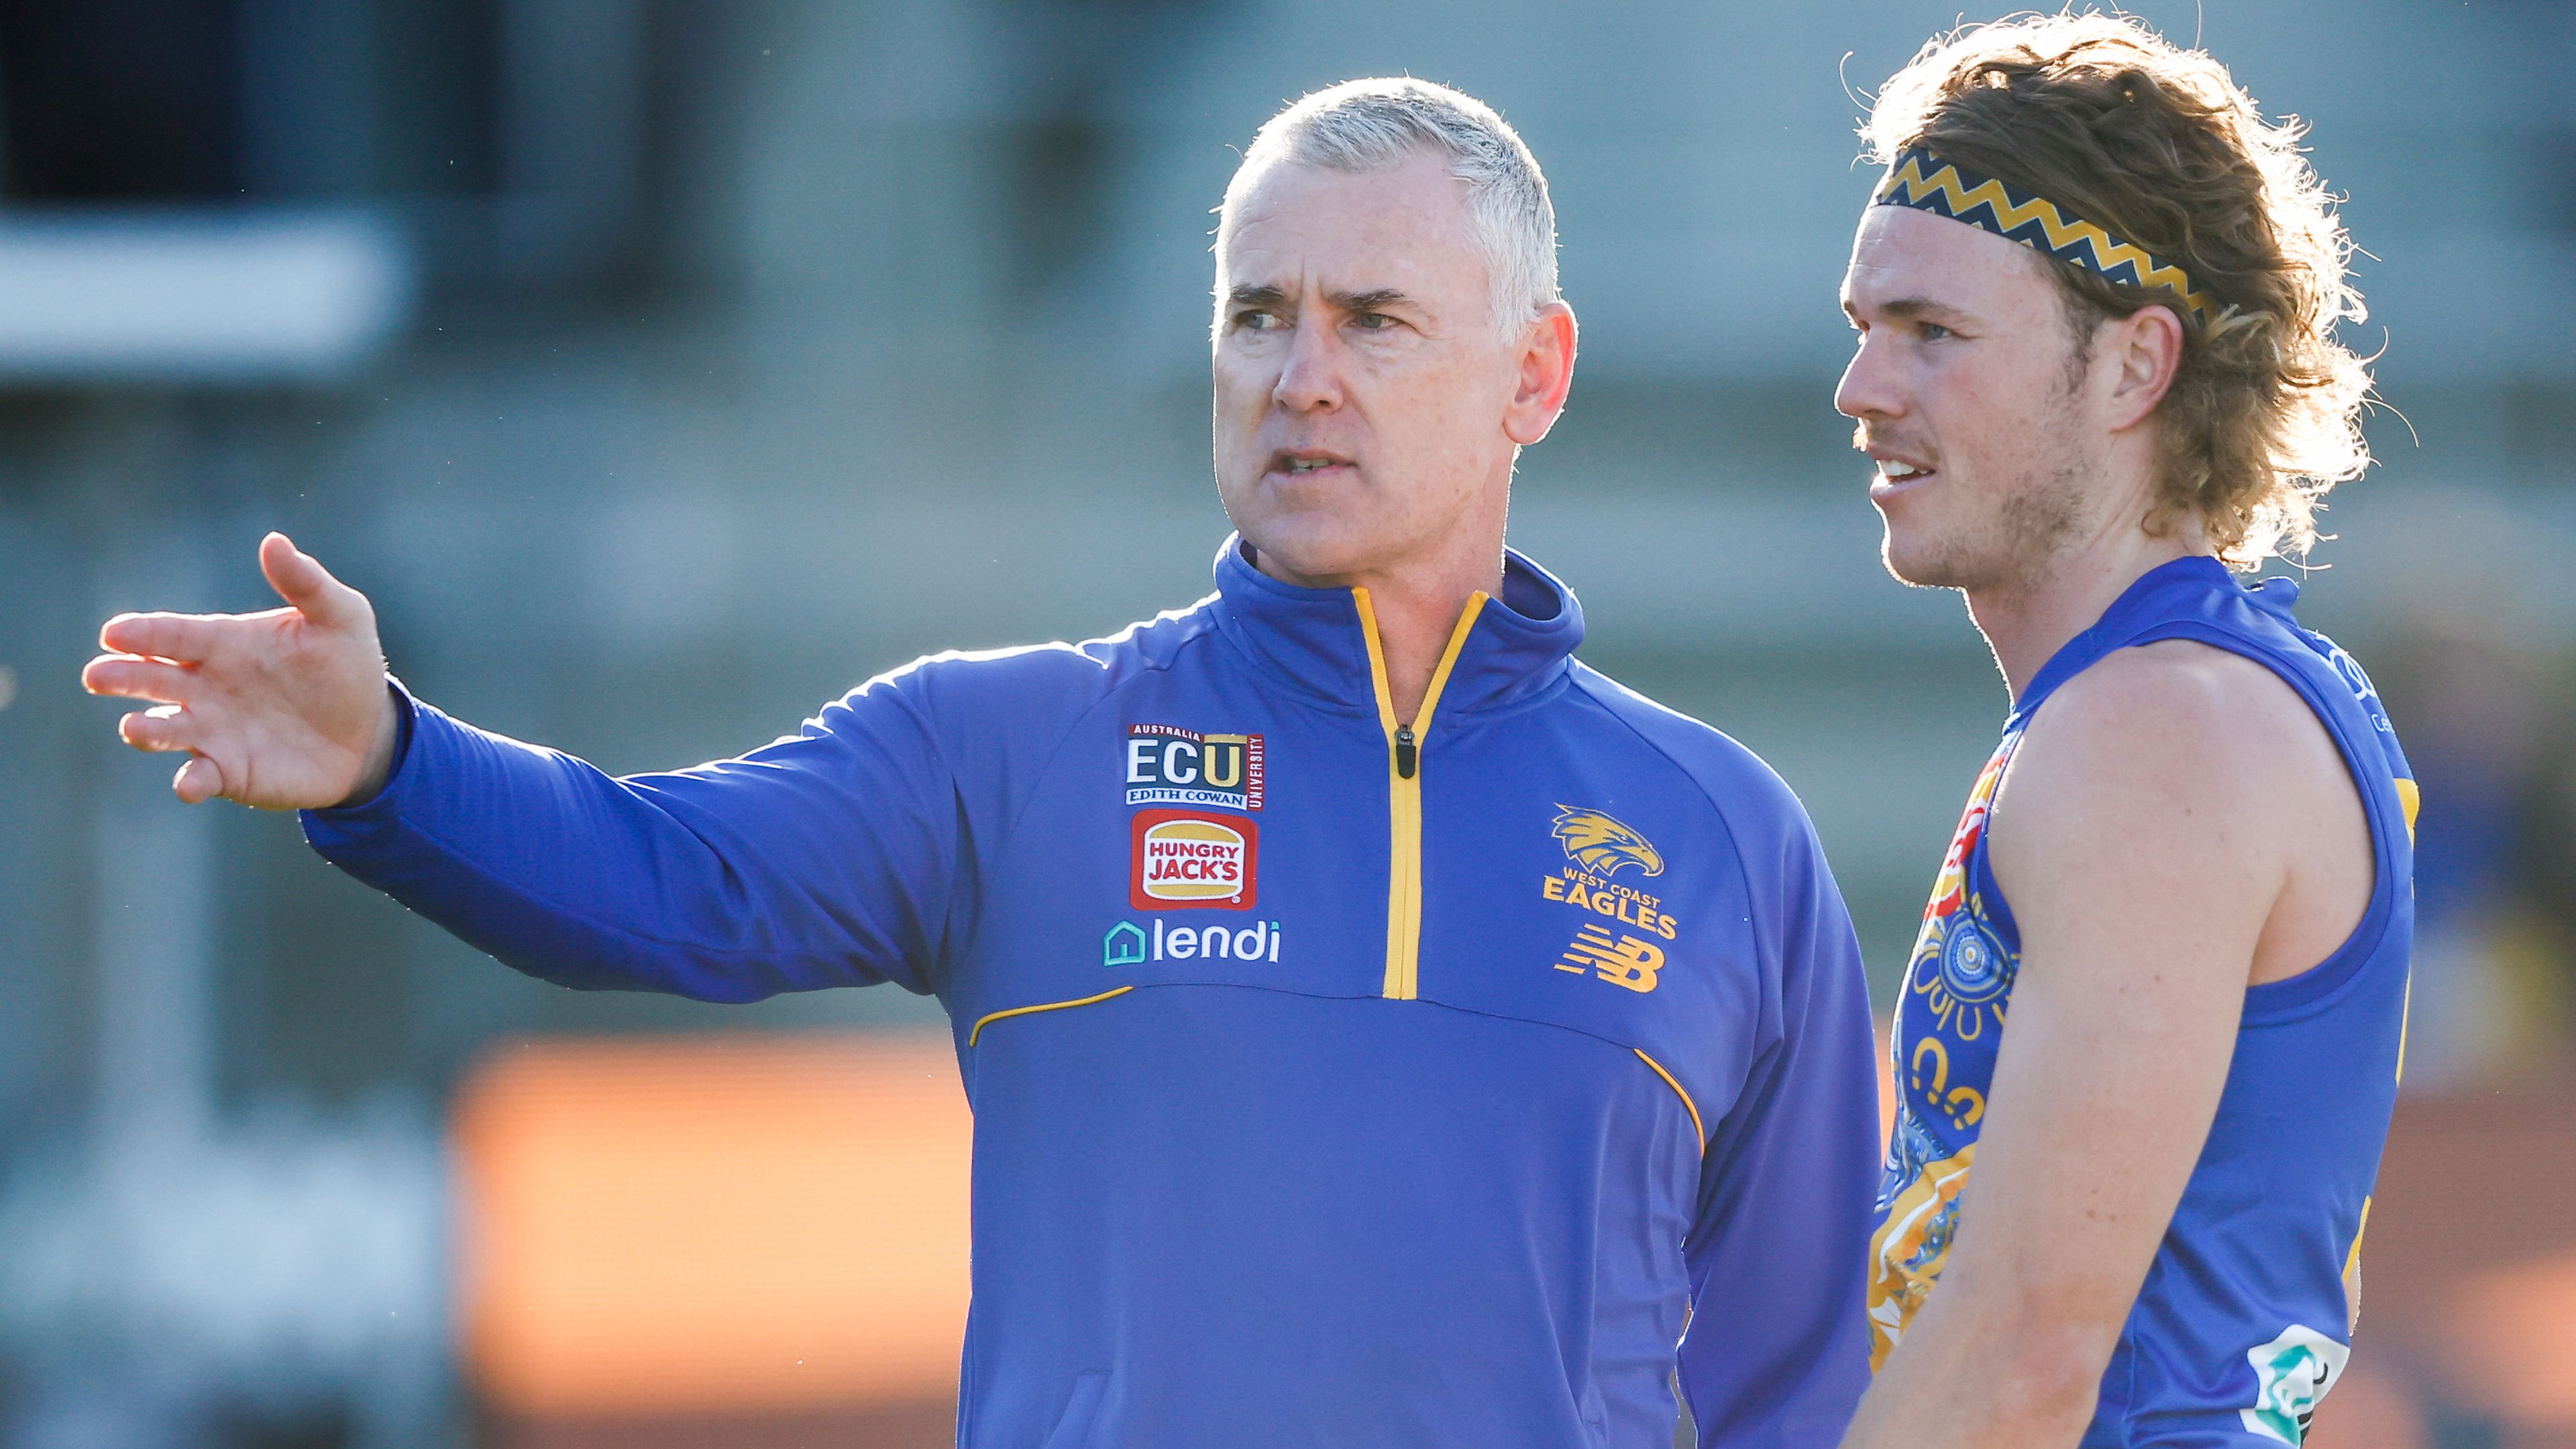 'Head in the sand': West Coast Eagles' 'arrogance' lashed after nightmare outing